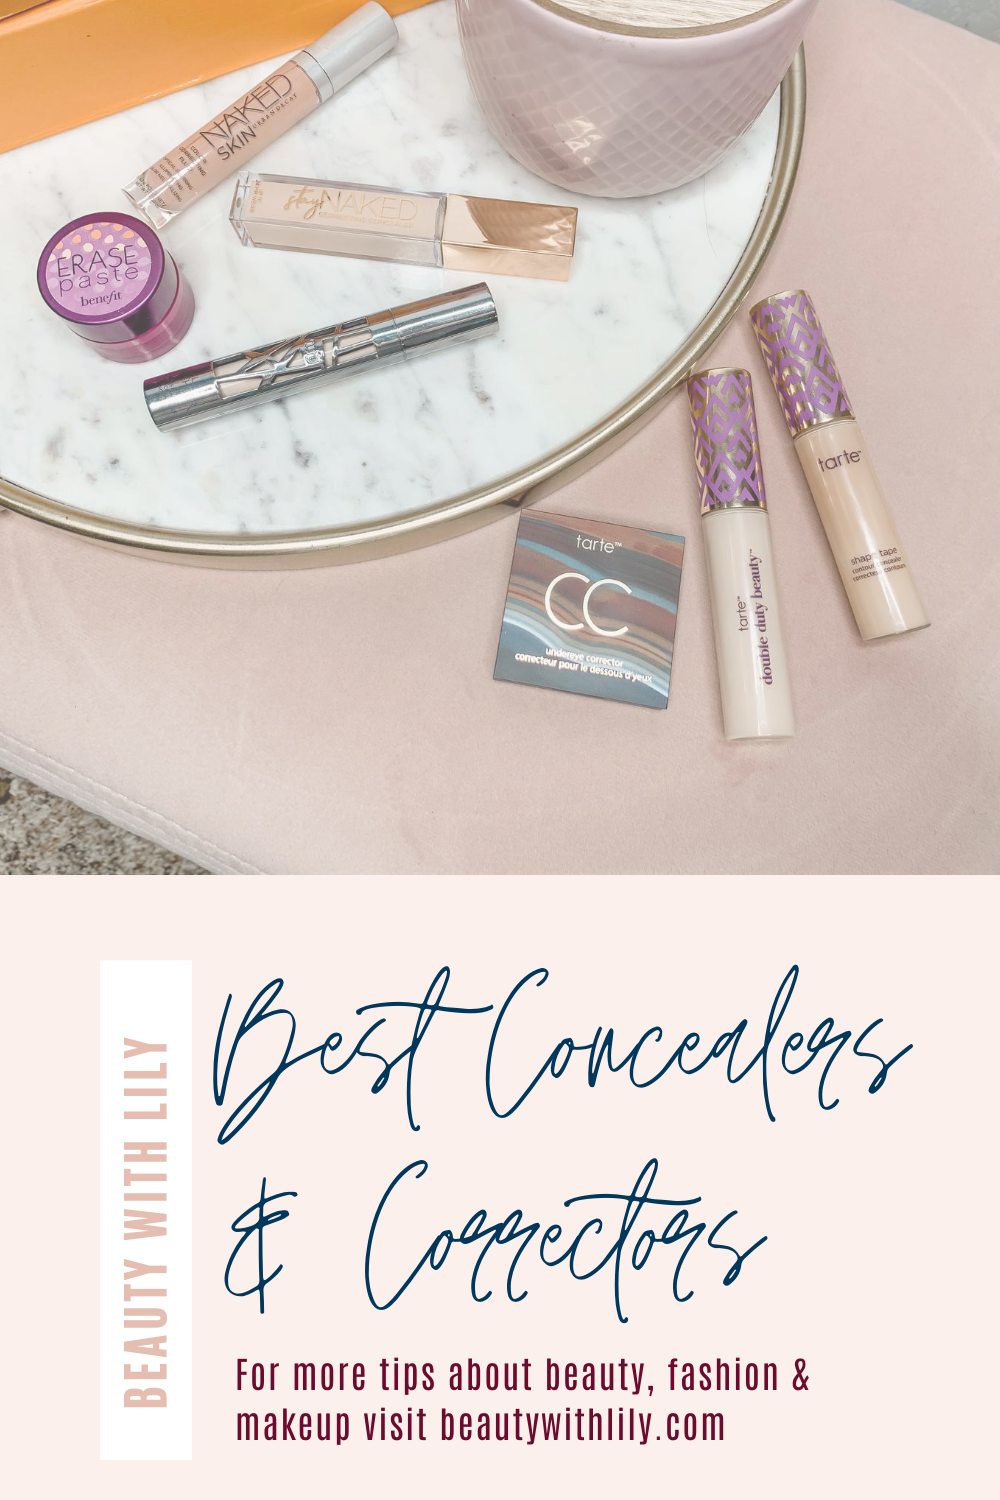 5 Concealer Tips and Tricks // Makeup Tips For Beginners // Concealer Do's and Don'ts // How To Apply Concealer // How To Apply Corrector // Drugstore Concealers // High-End Concealers // Makeup Tips & Tricks | Beauty With Lily #makeupforbeginners #makeuptips